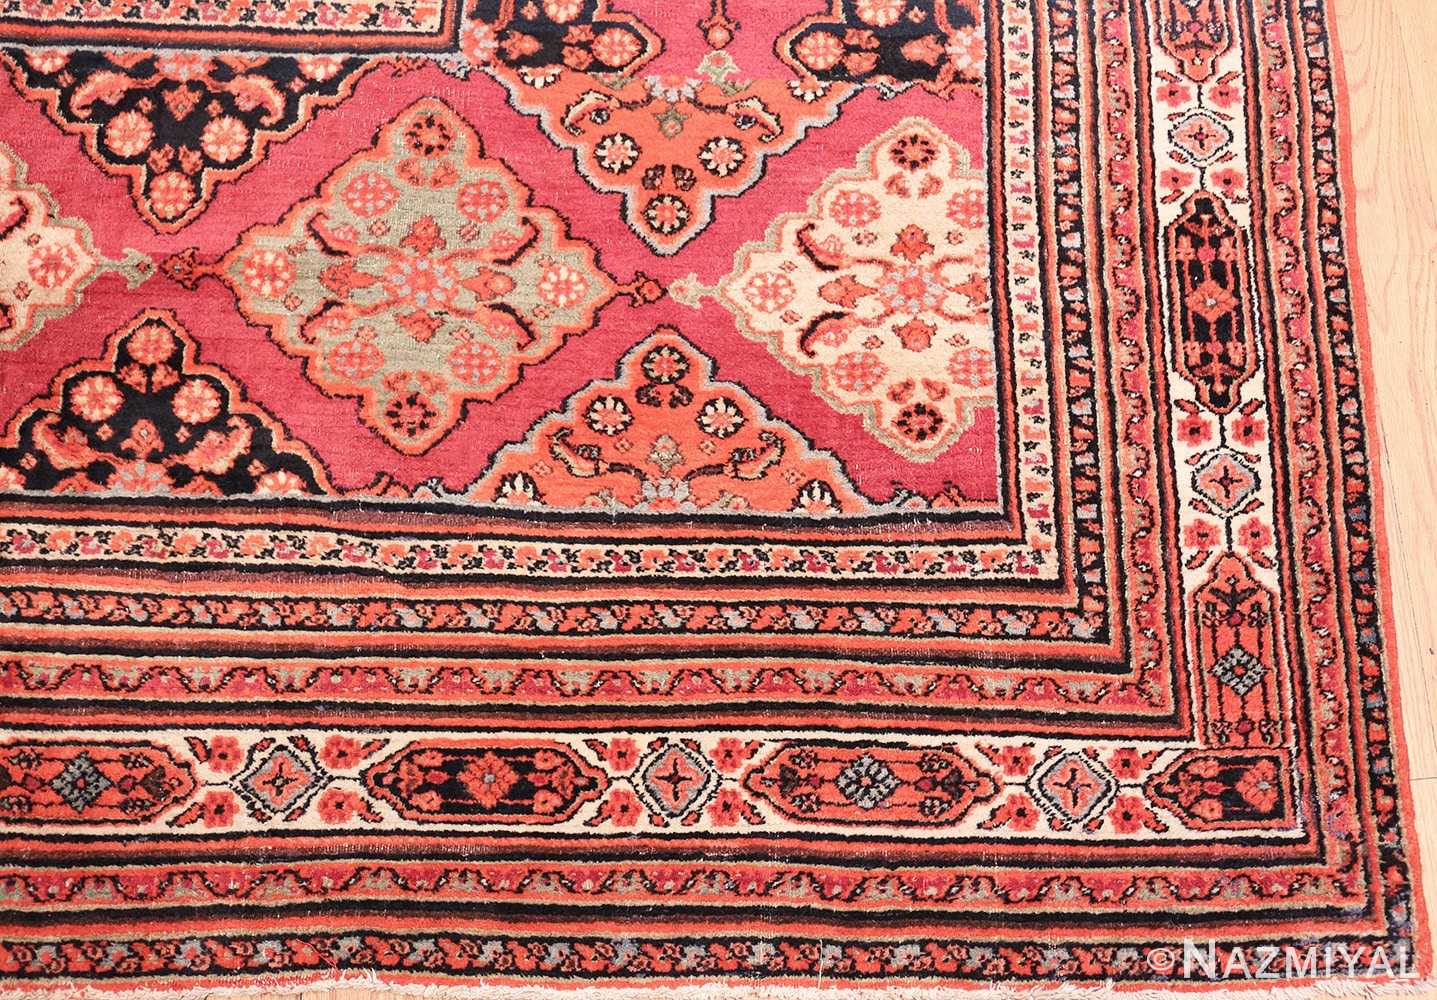 Picture of the border of Large Antique Persian Open Field Khorassan Carpet #47363 From Nazmiyal Antique Rugs in NYC